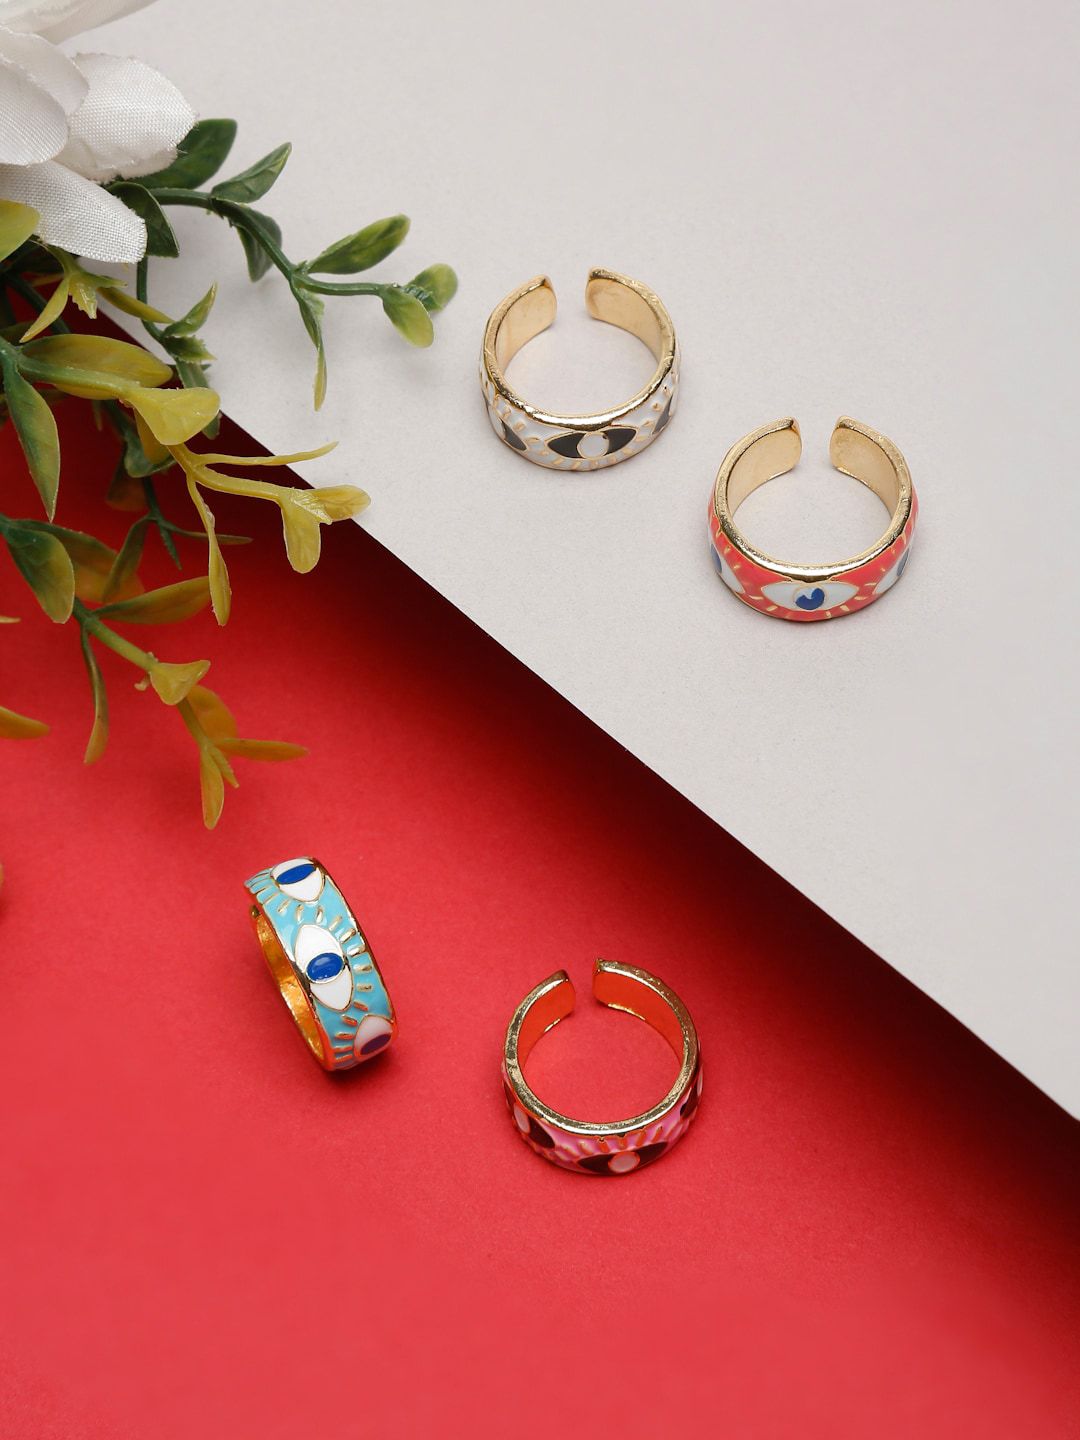 YouBella Set Of 4 Gold-Toned & Enameled Handcrafted Finger Rings Price in India